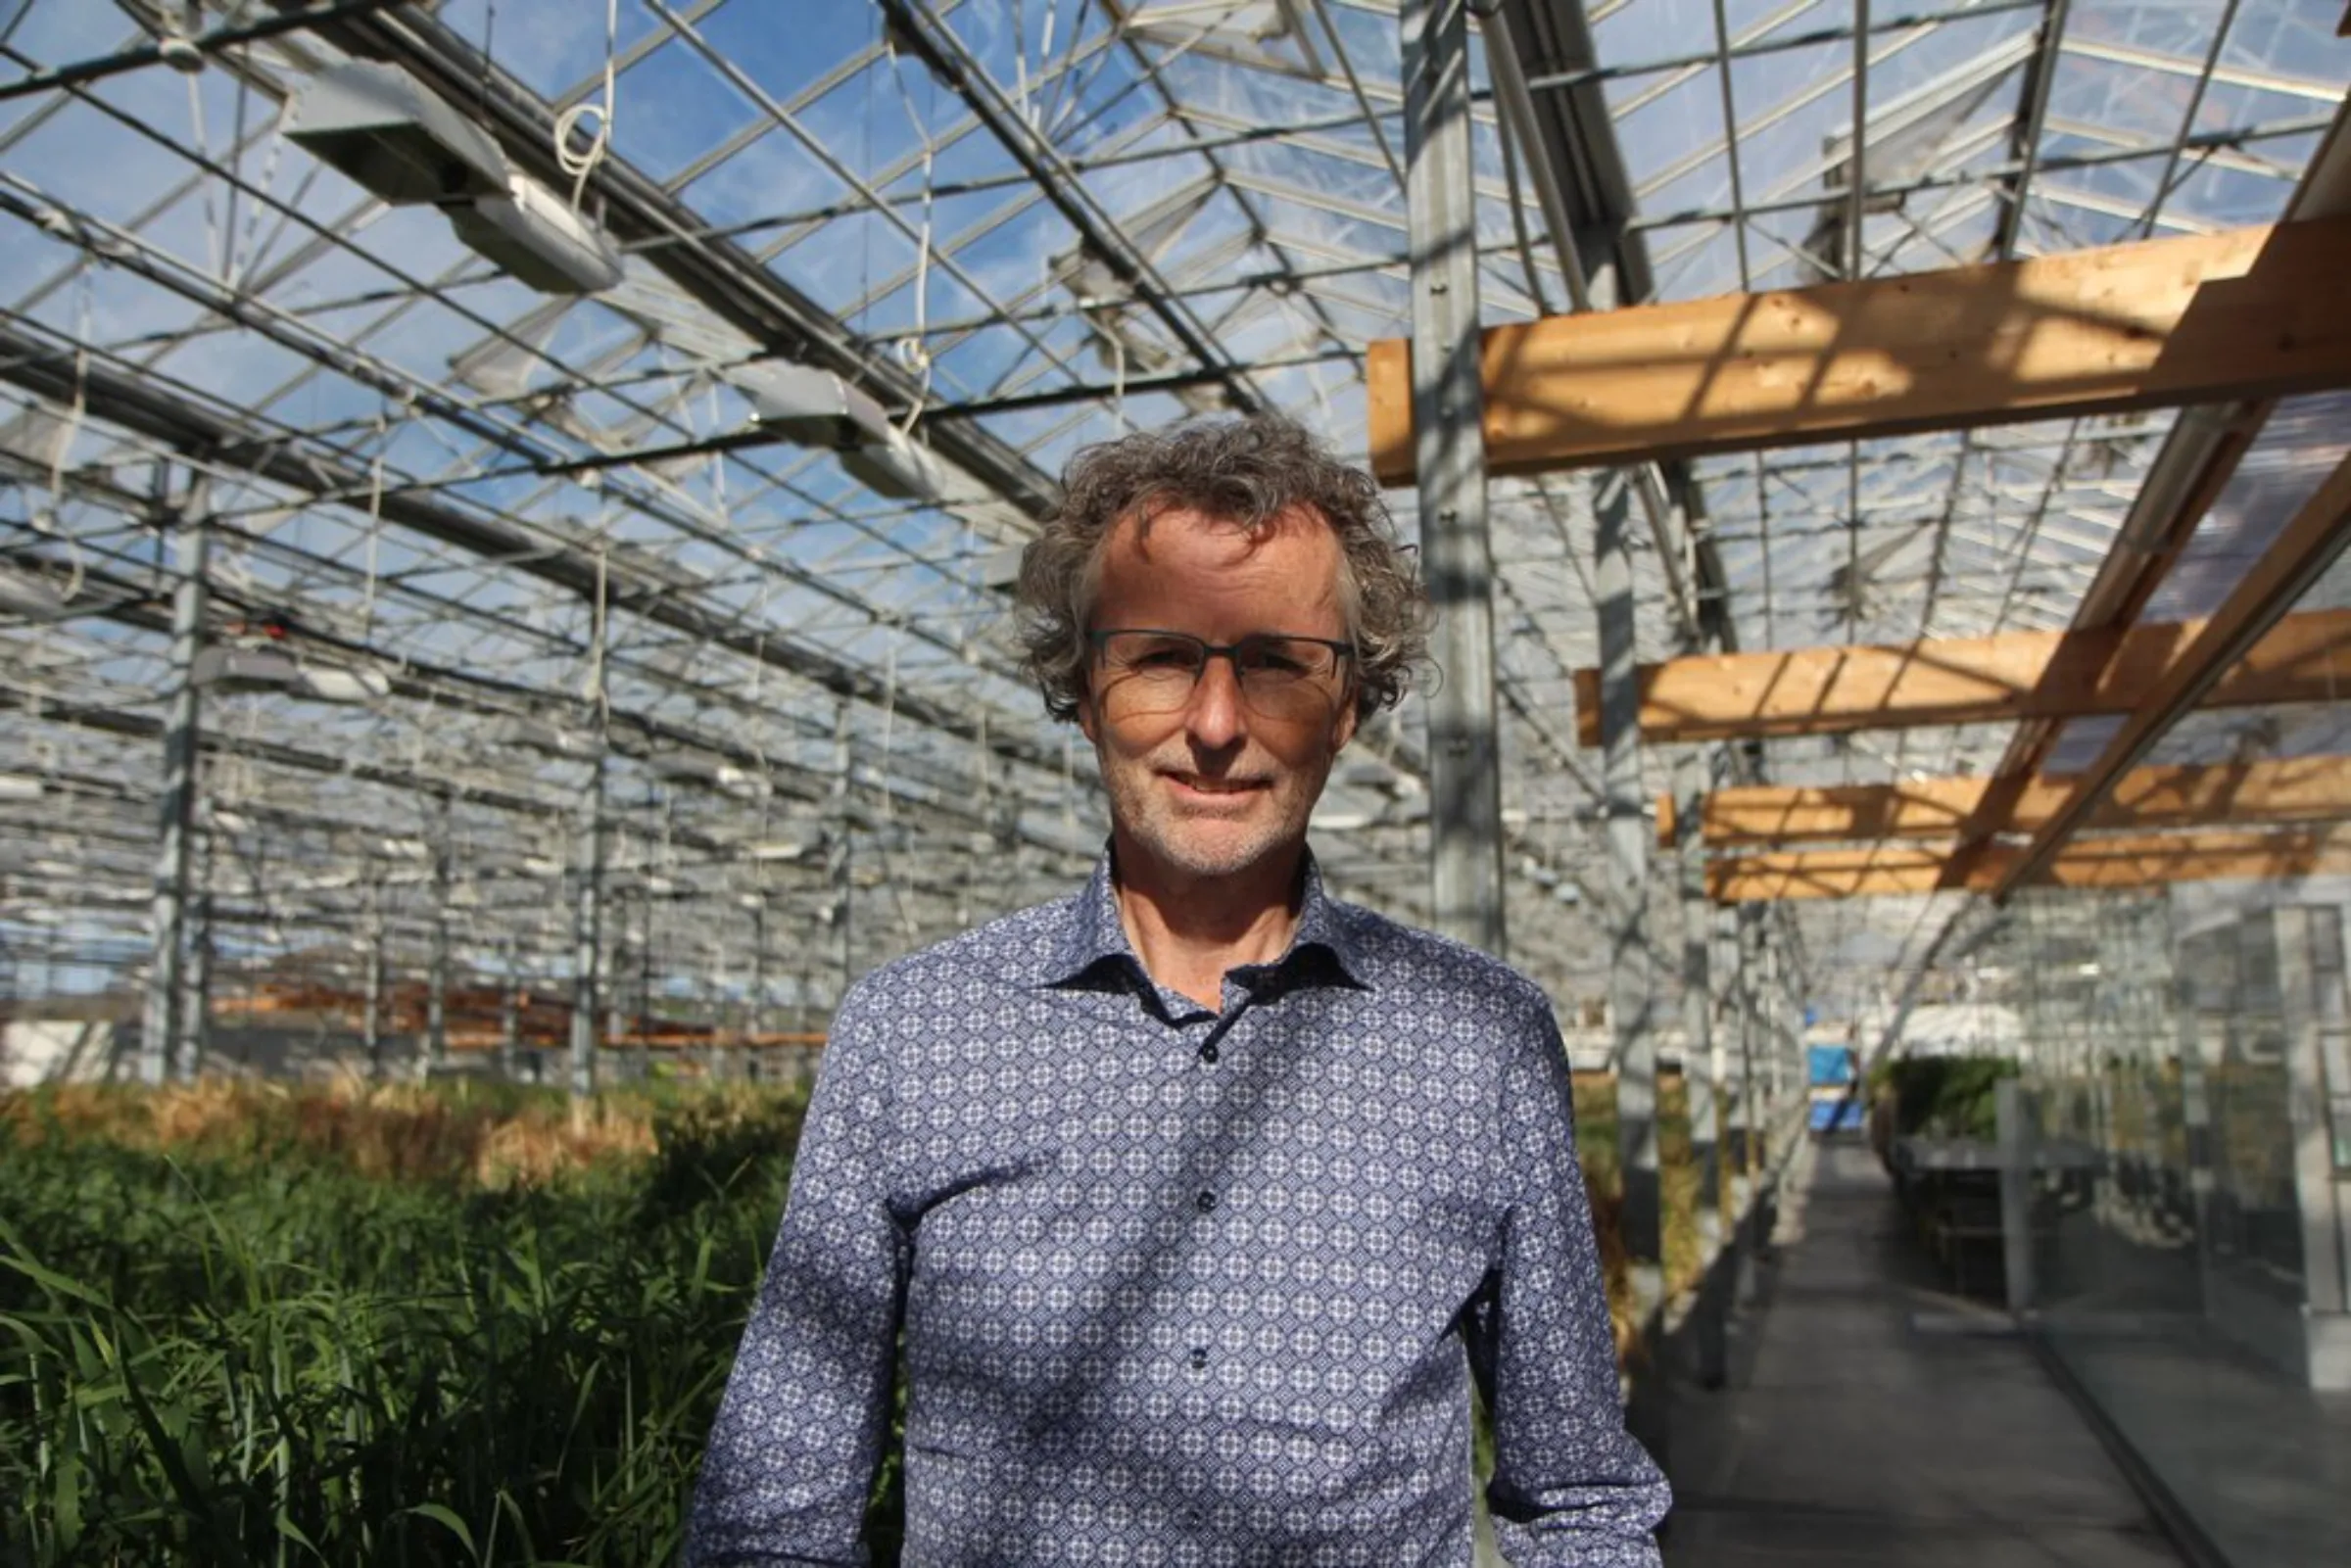 Bjorn Orvar, co-founder and Chief Scientific Officer at ORF Genetics, poses for the camera at the company’s greenhouse in southwest Iceland on August 24, 2020